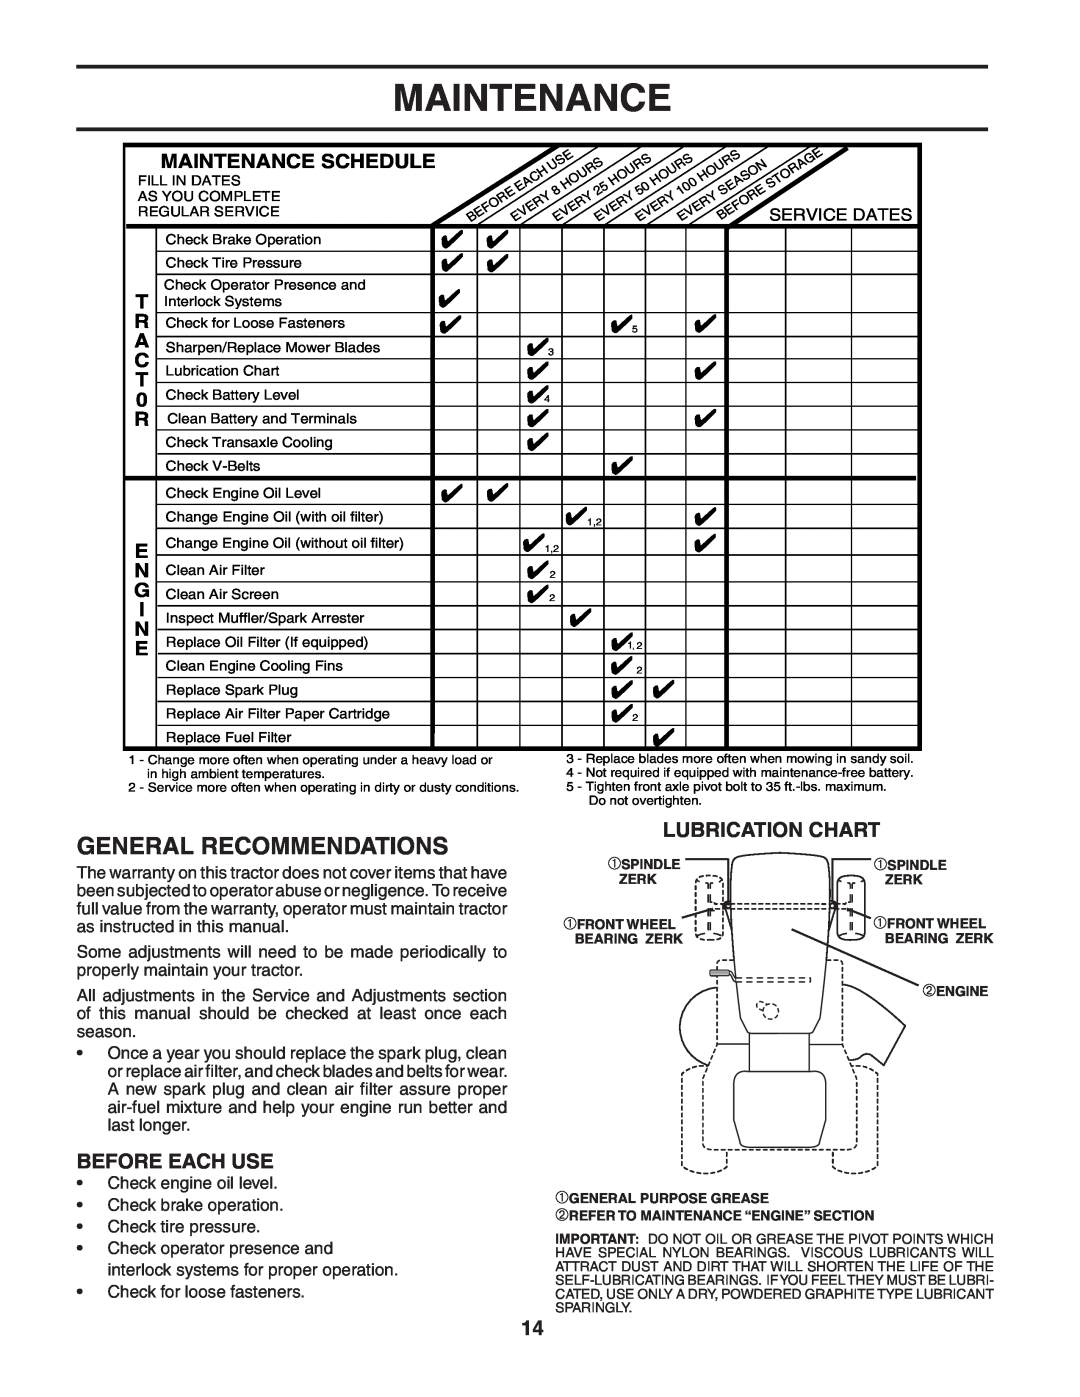 Poulan 183981 manual General Recommendations, Lubrication Chart, Before Each Use, Maintenance Schedule 